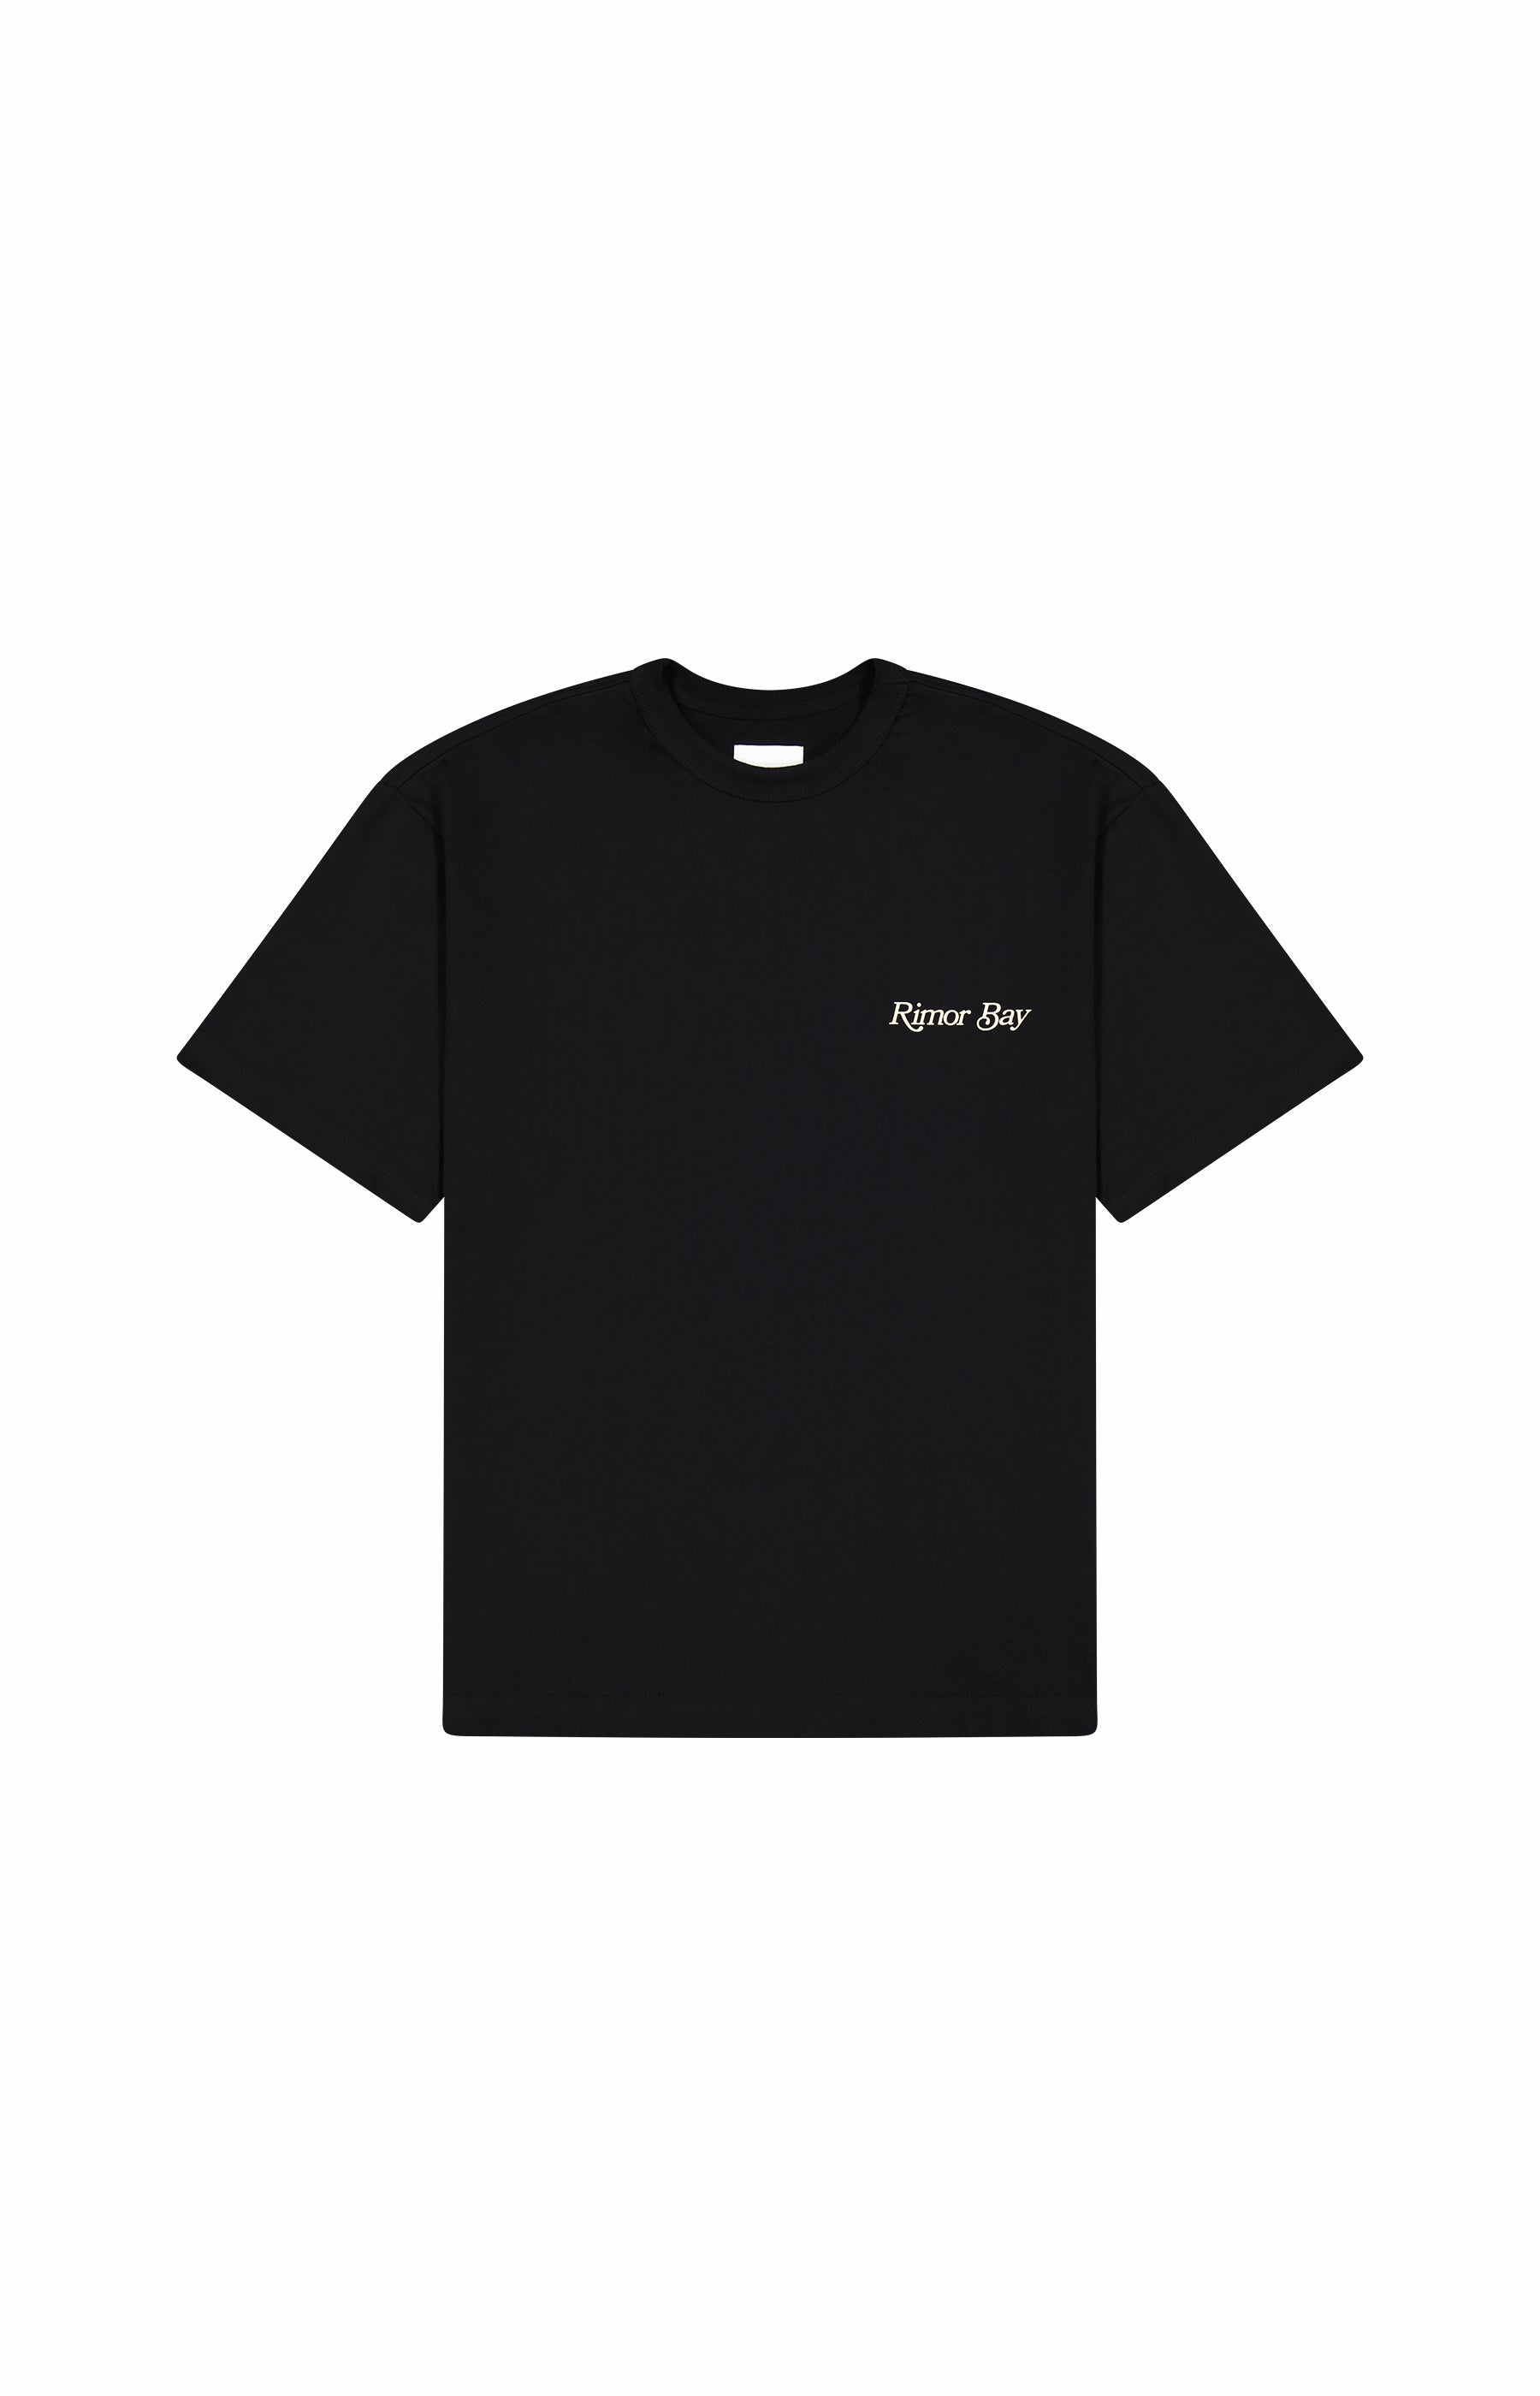 front of black short sleeve tshirt with logo on chest